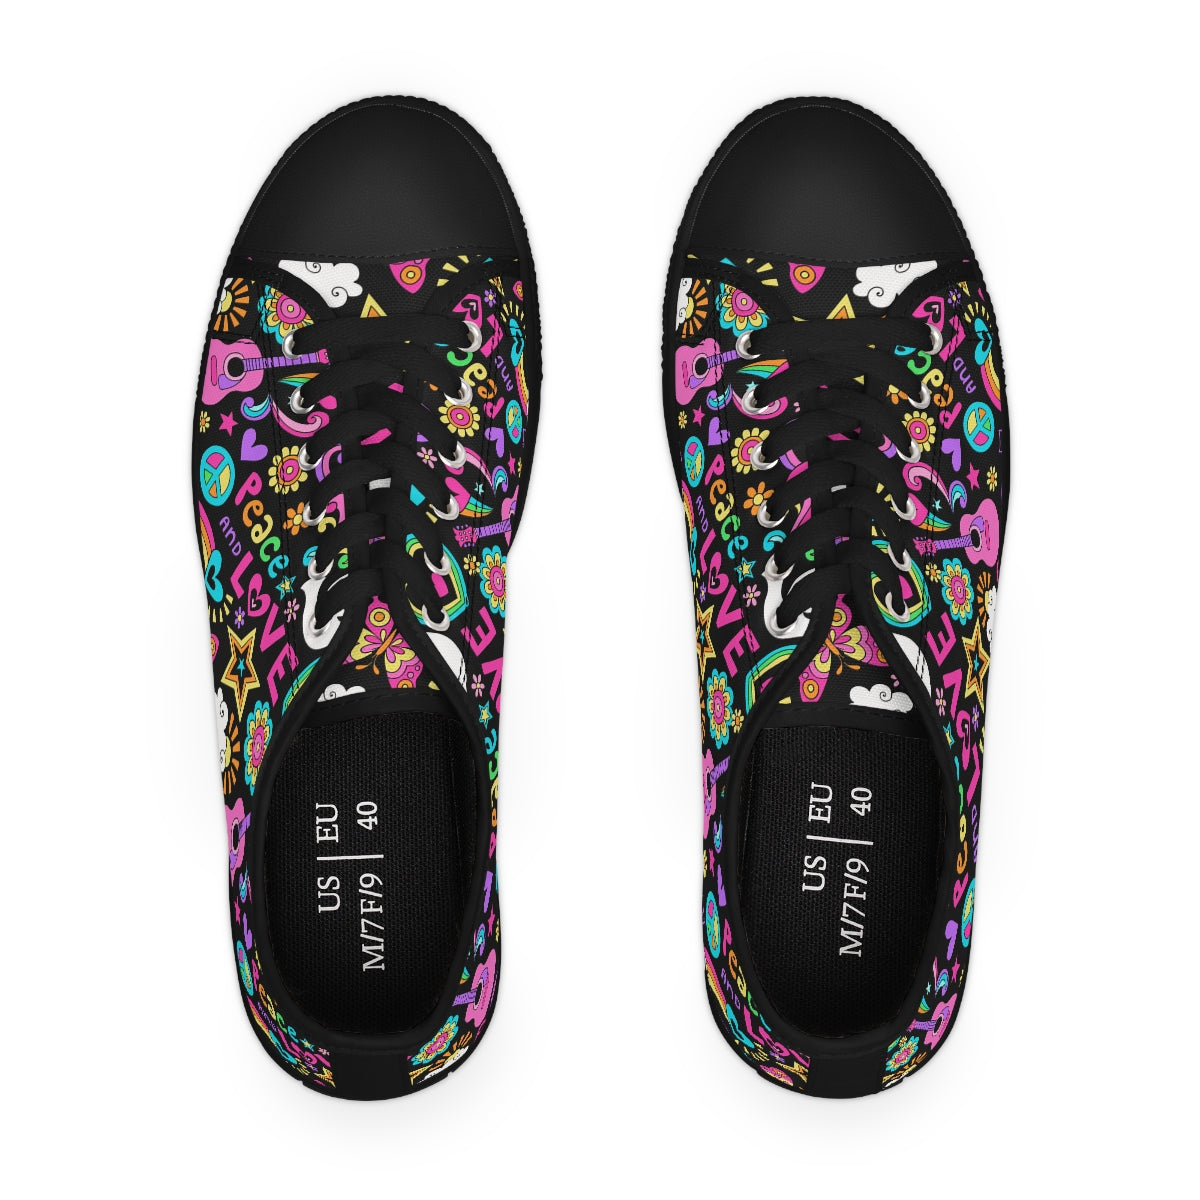 Peace Love Print - Women's Low Top Sneakers ( Black or White Sole )